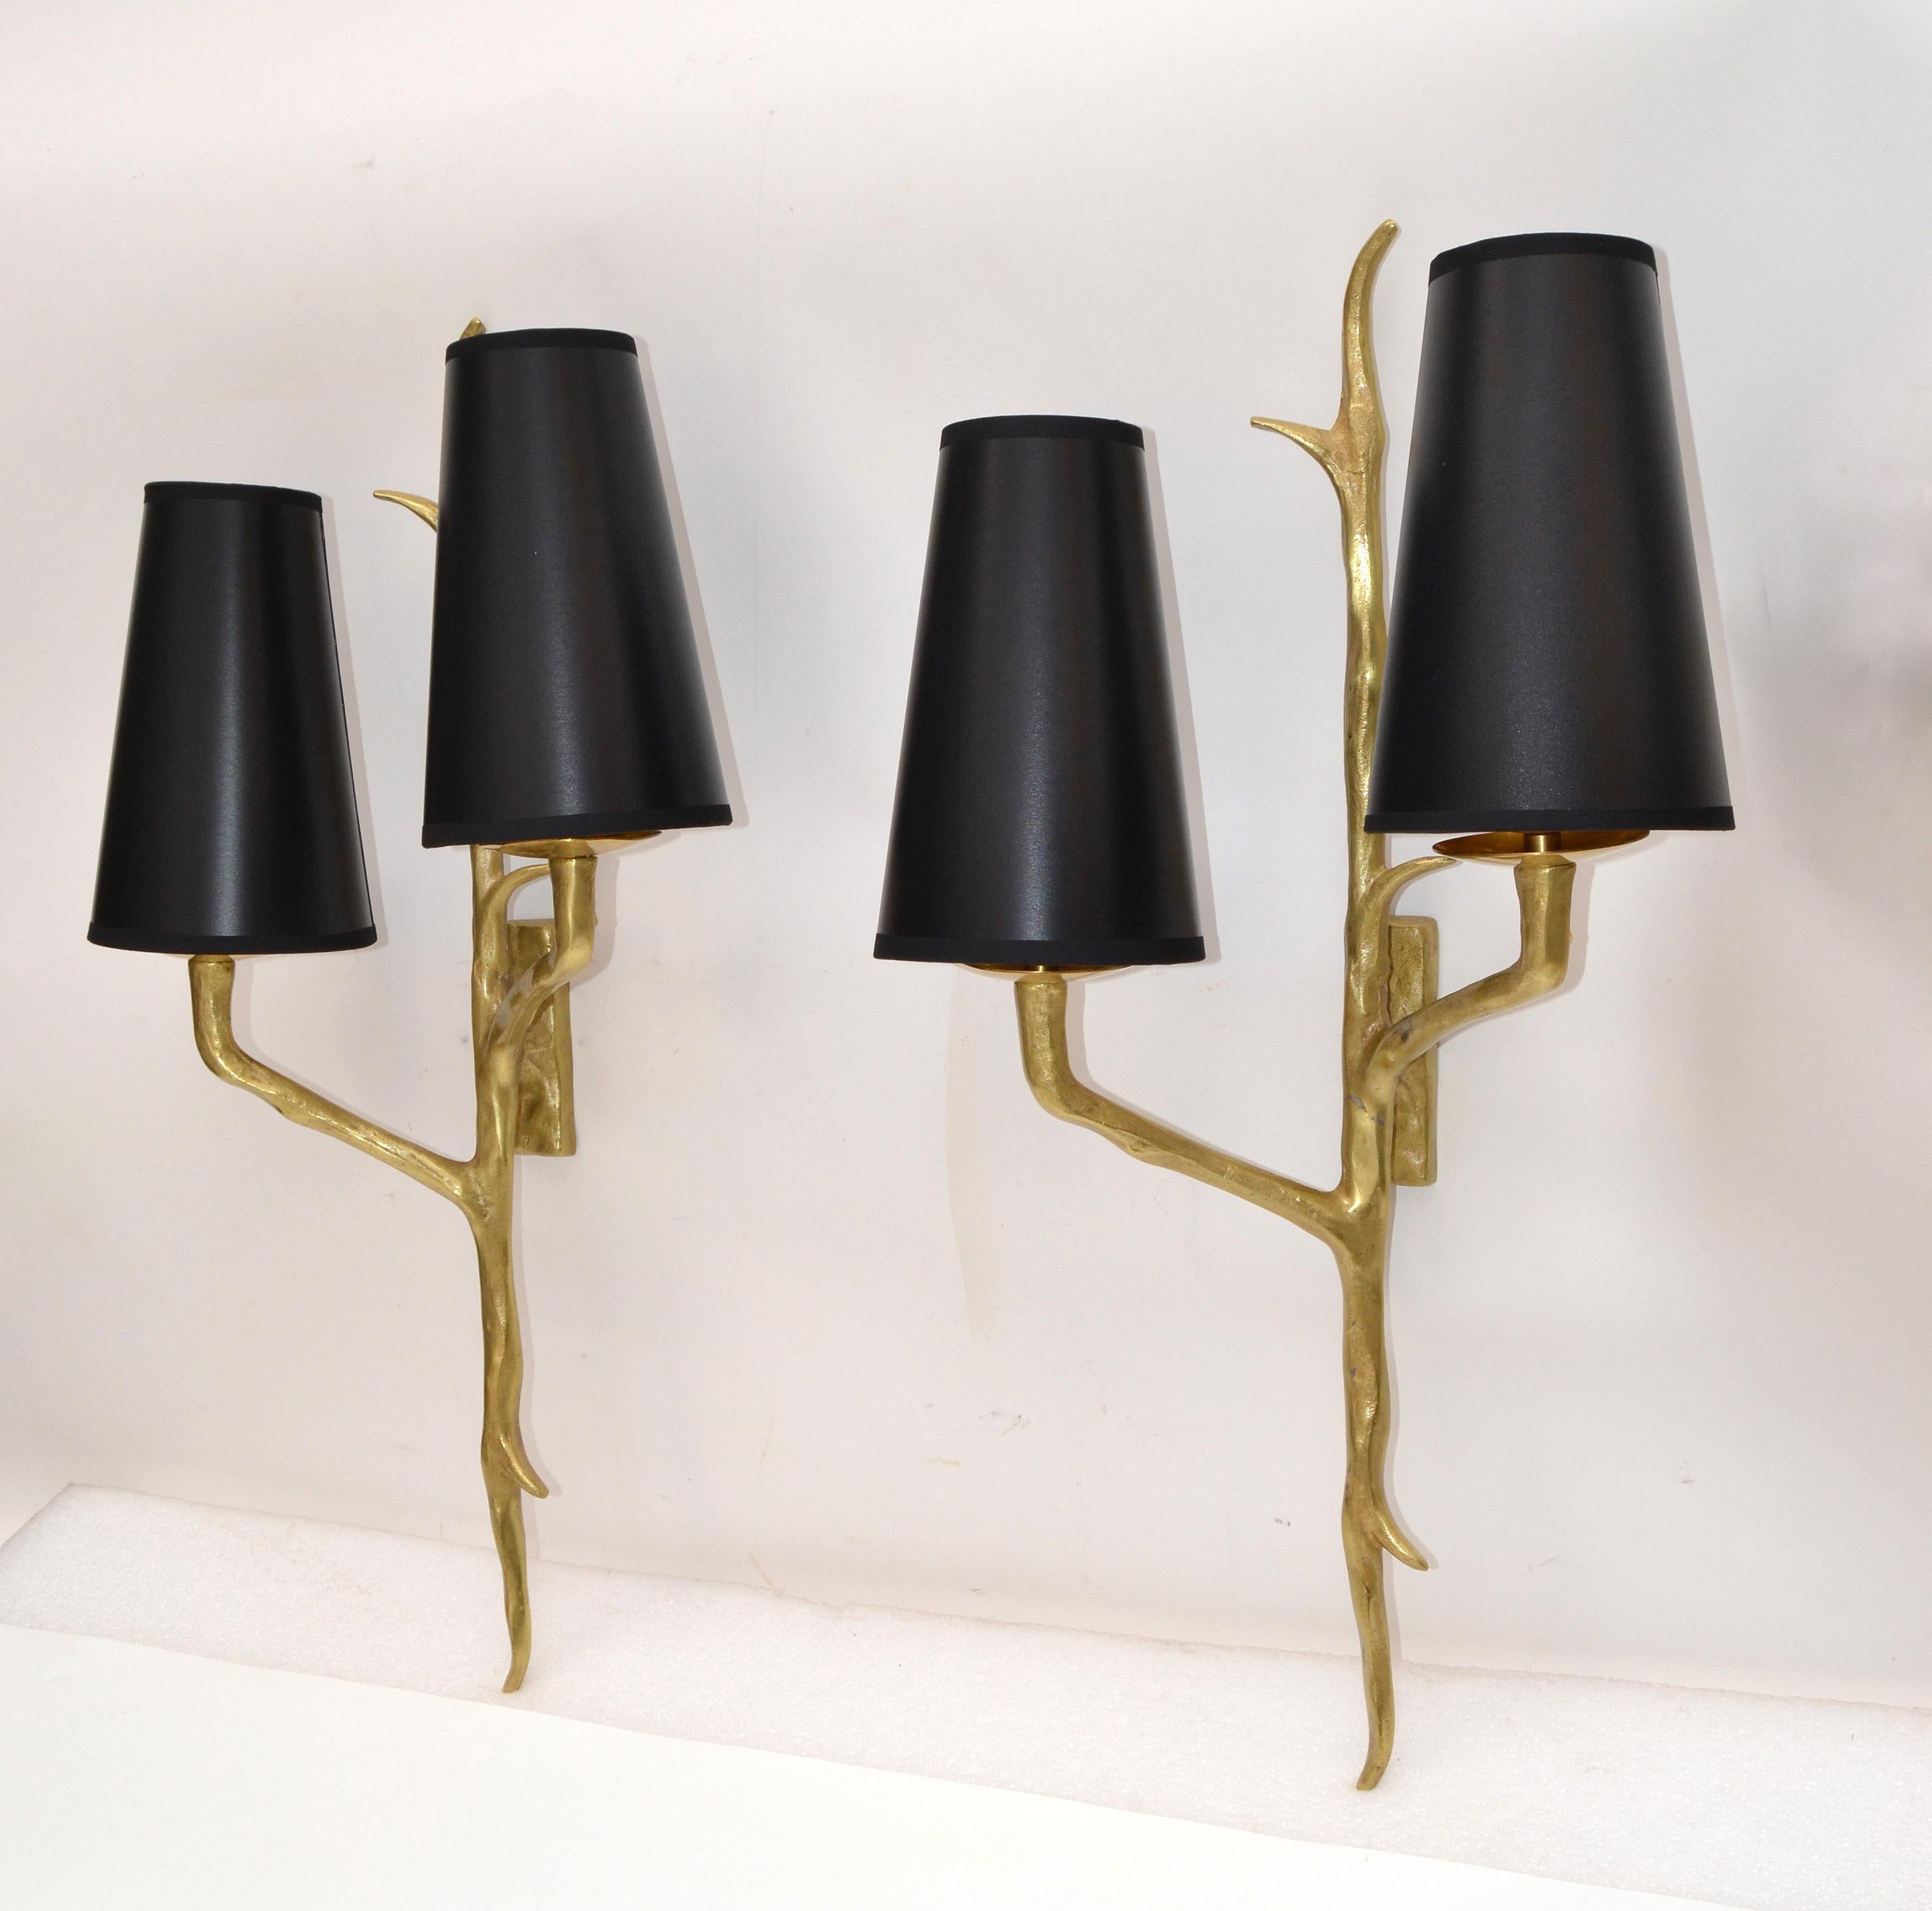 Pair of Agostini Style Sconces Bronze with Black and Gold Shades, France, 1950s For Sale 3